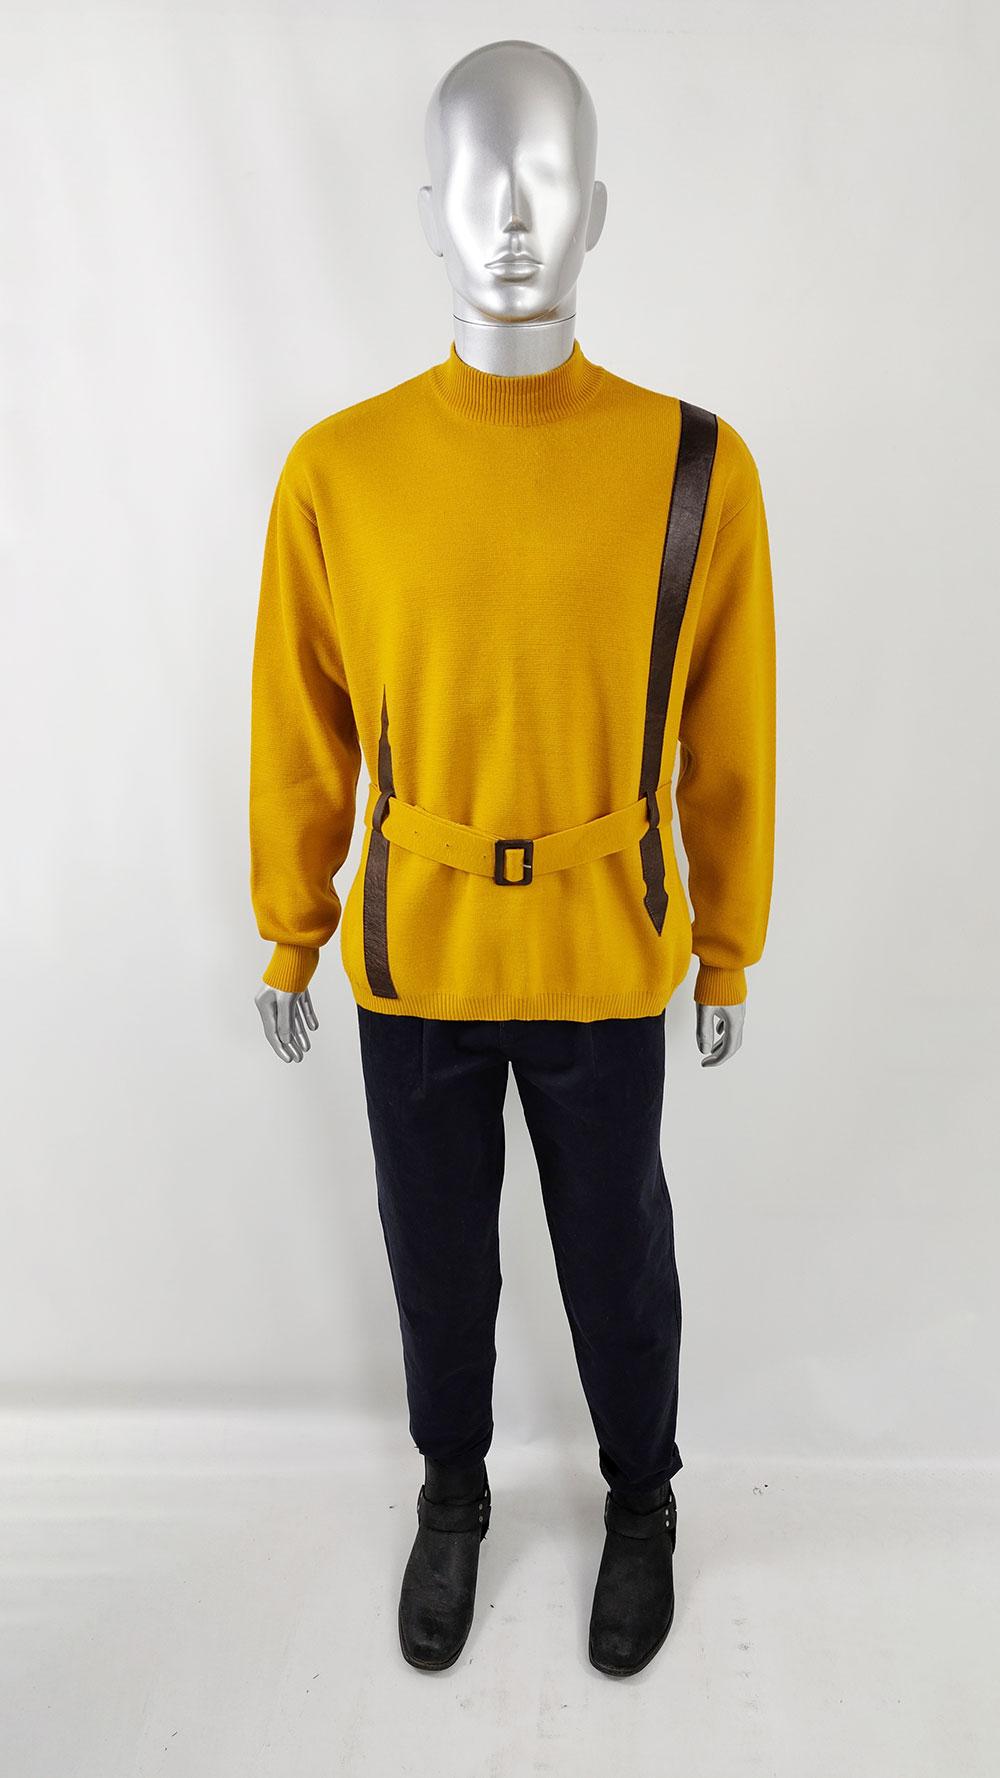 A superb and rare men's vintage jumper from the 1960s by the luxury British department store, Harrods. Crafted in mustard yellow pure wool, the jumper features dark brown vinyl appliques and a remarkable belt that imparts a retro space-age